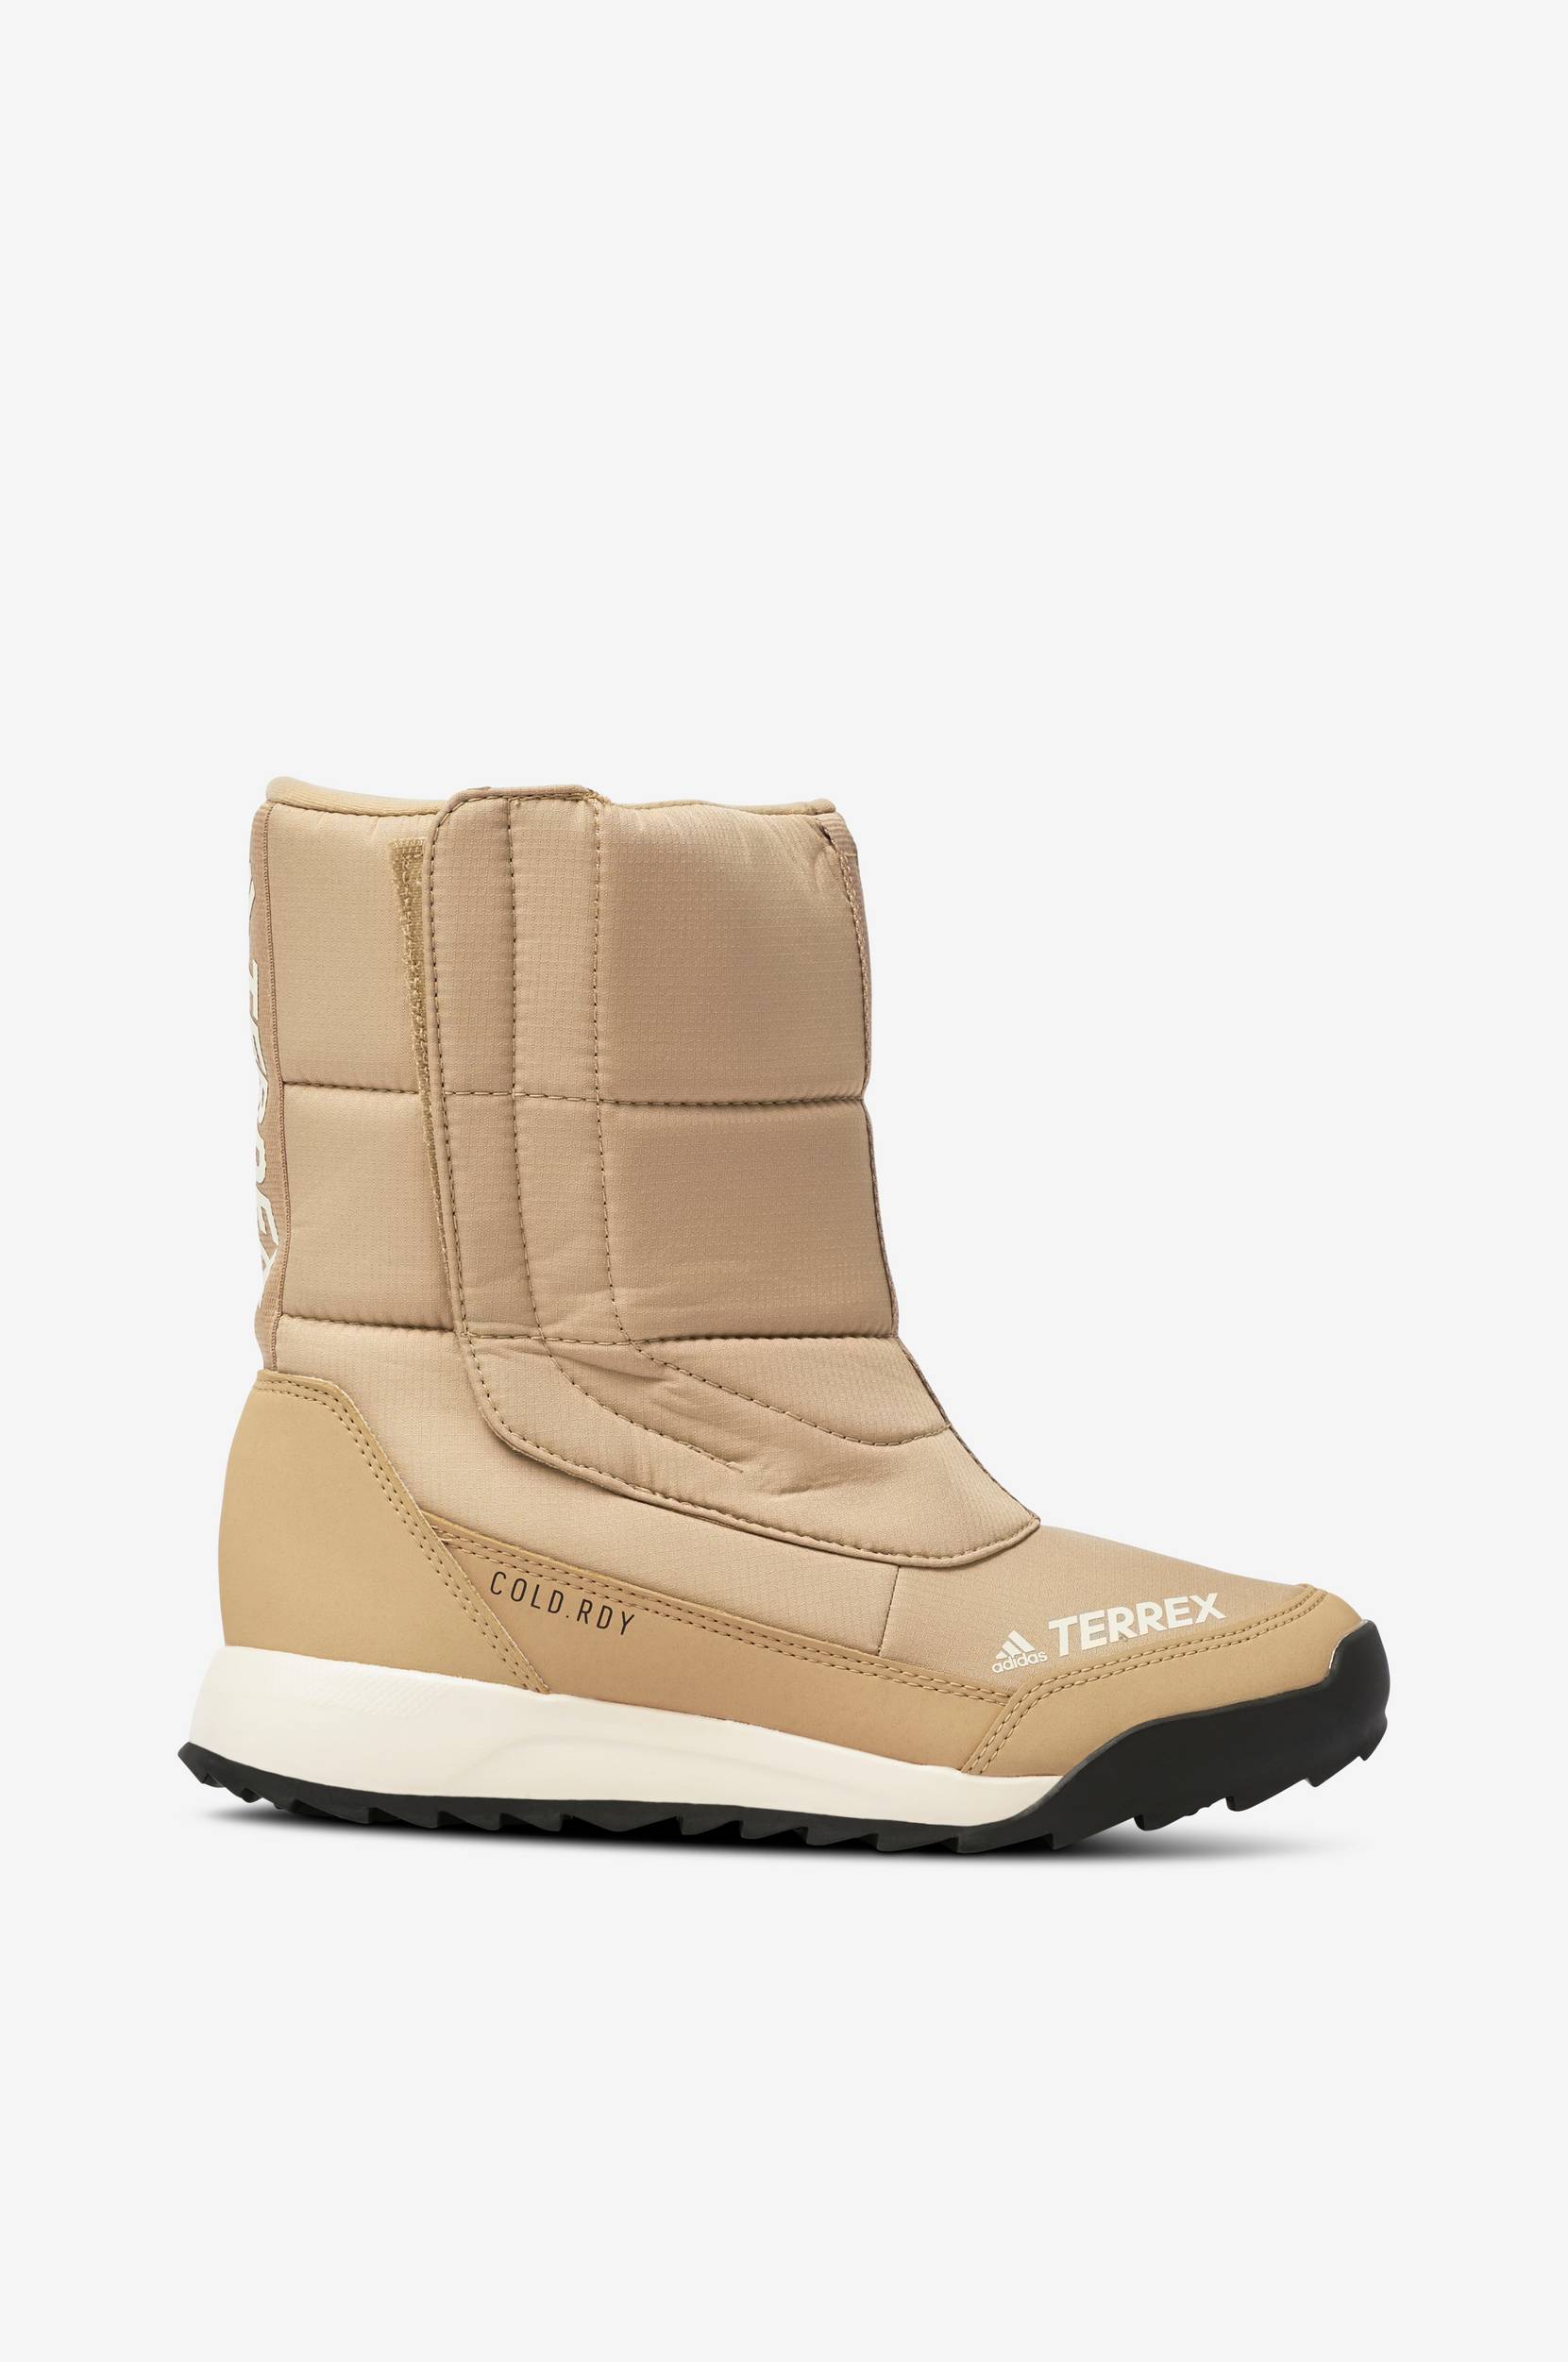 adidas Sport Performance - Boots Terrex Choleah Cold.rdy Boots - Beige - 40